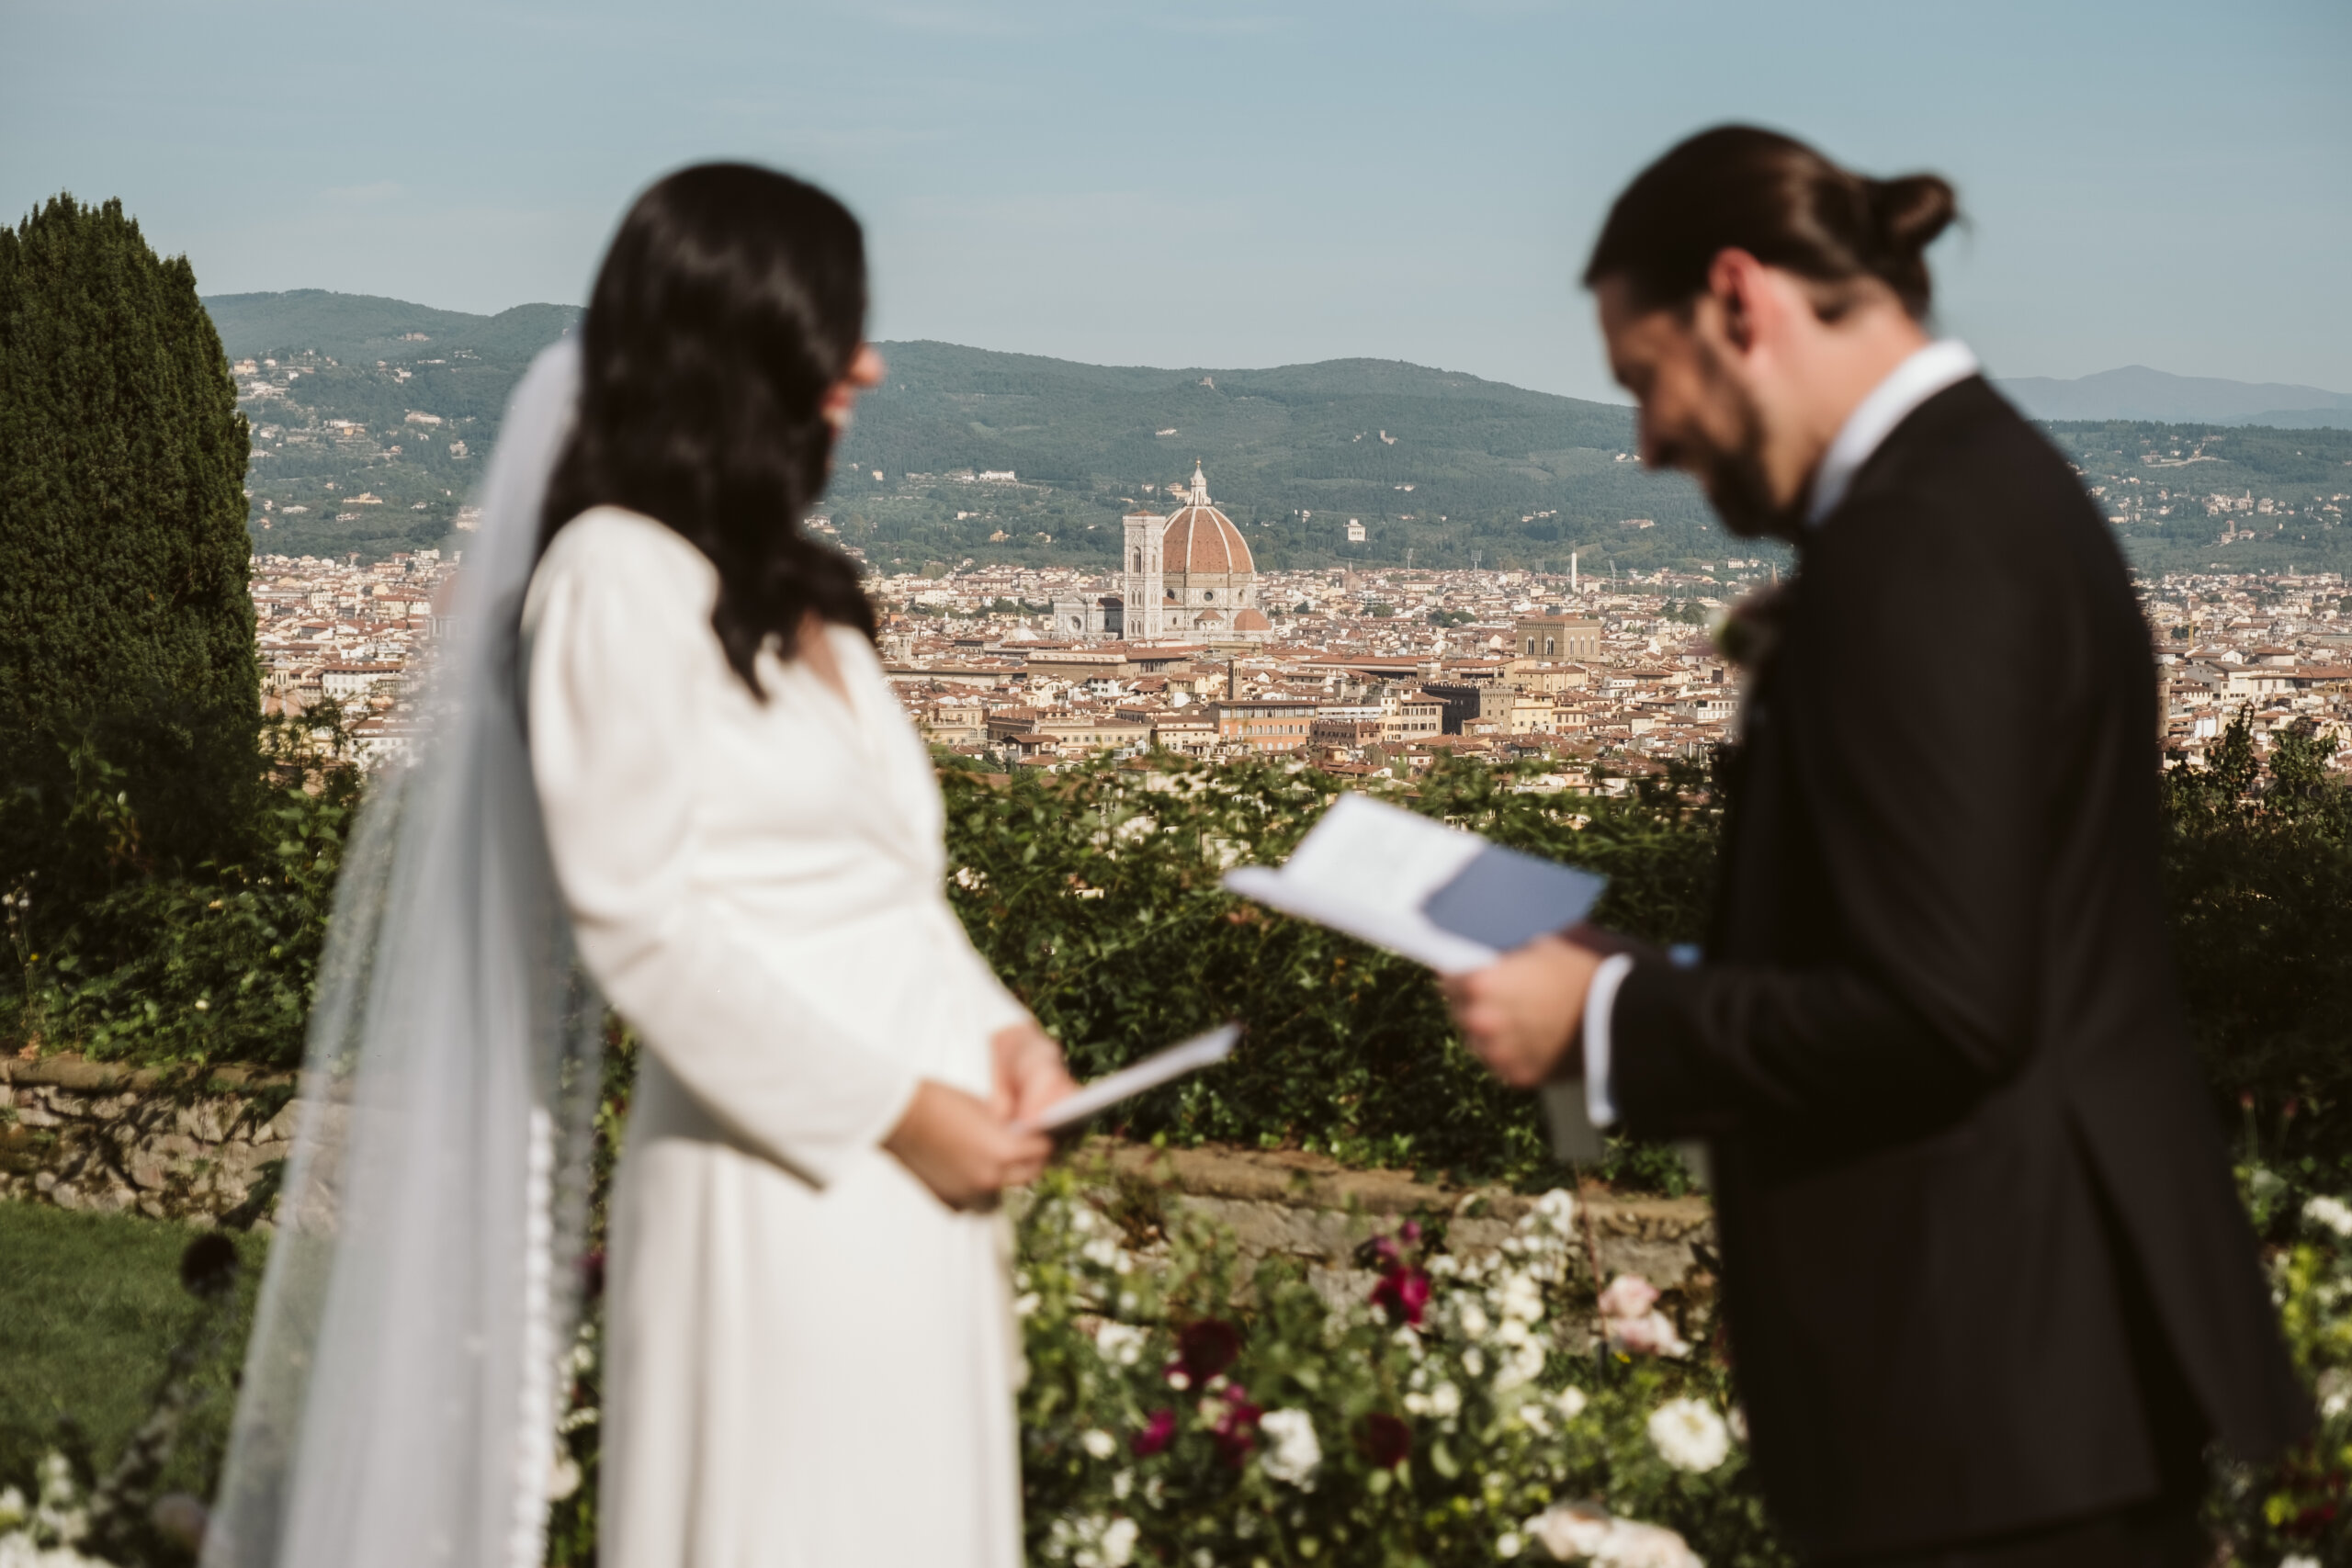 Saying your vows surrounded by the garden, the Duomo, and the Florentine hills 